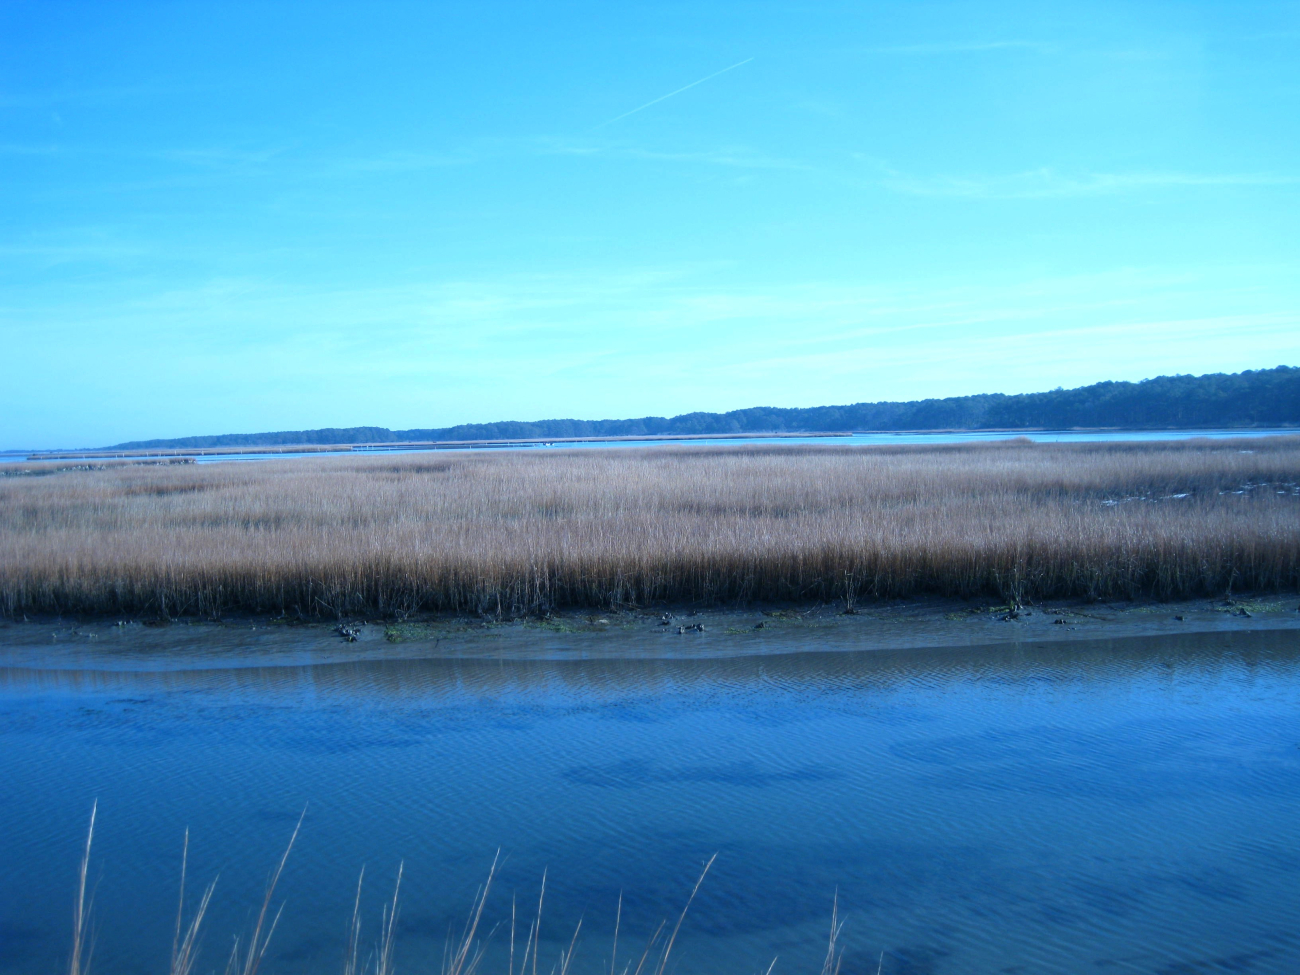 Looking across the wetlands of Chincoteague Bay to Assateague Island